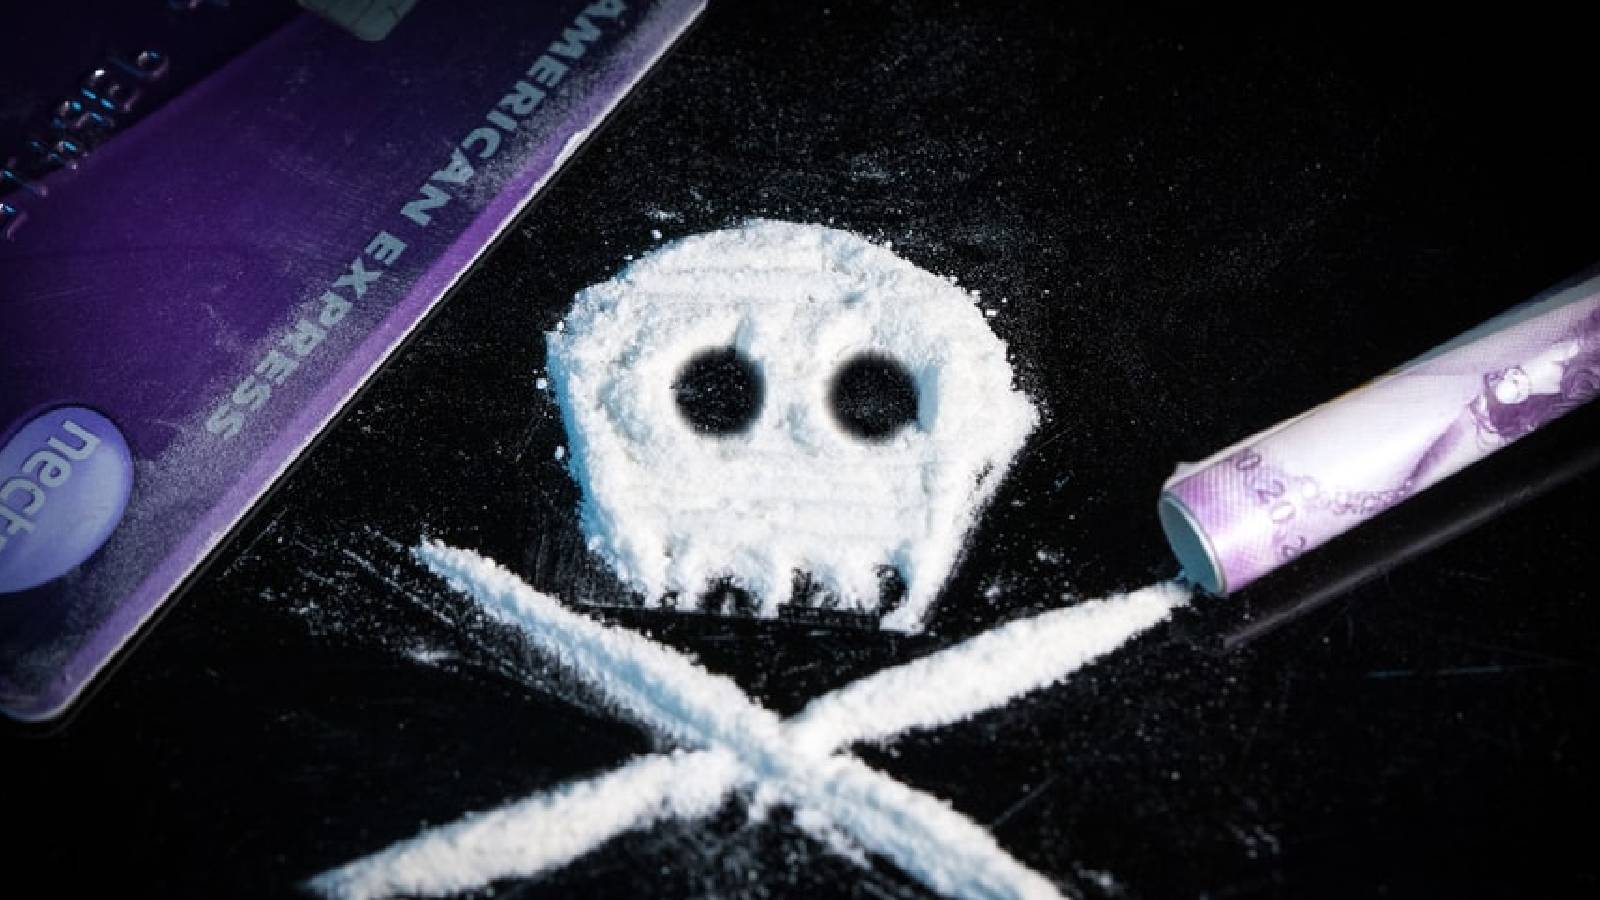 UN-backed report is concerned over the link between social media and drug use